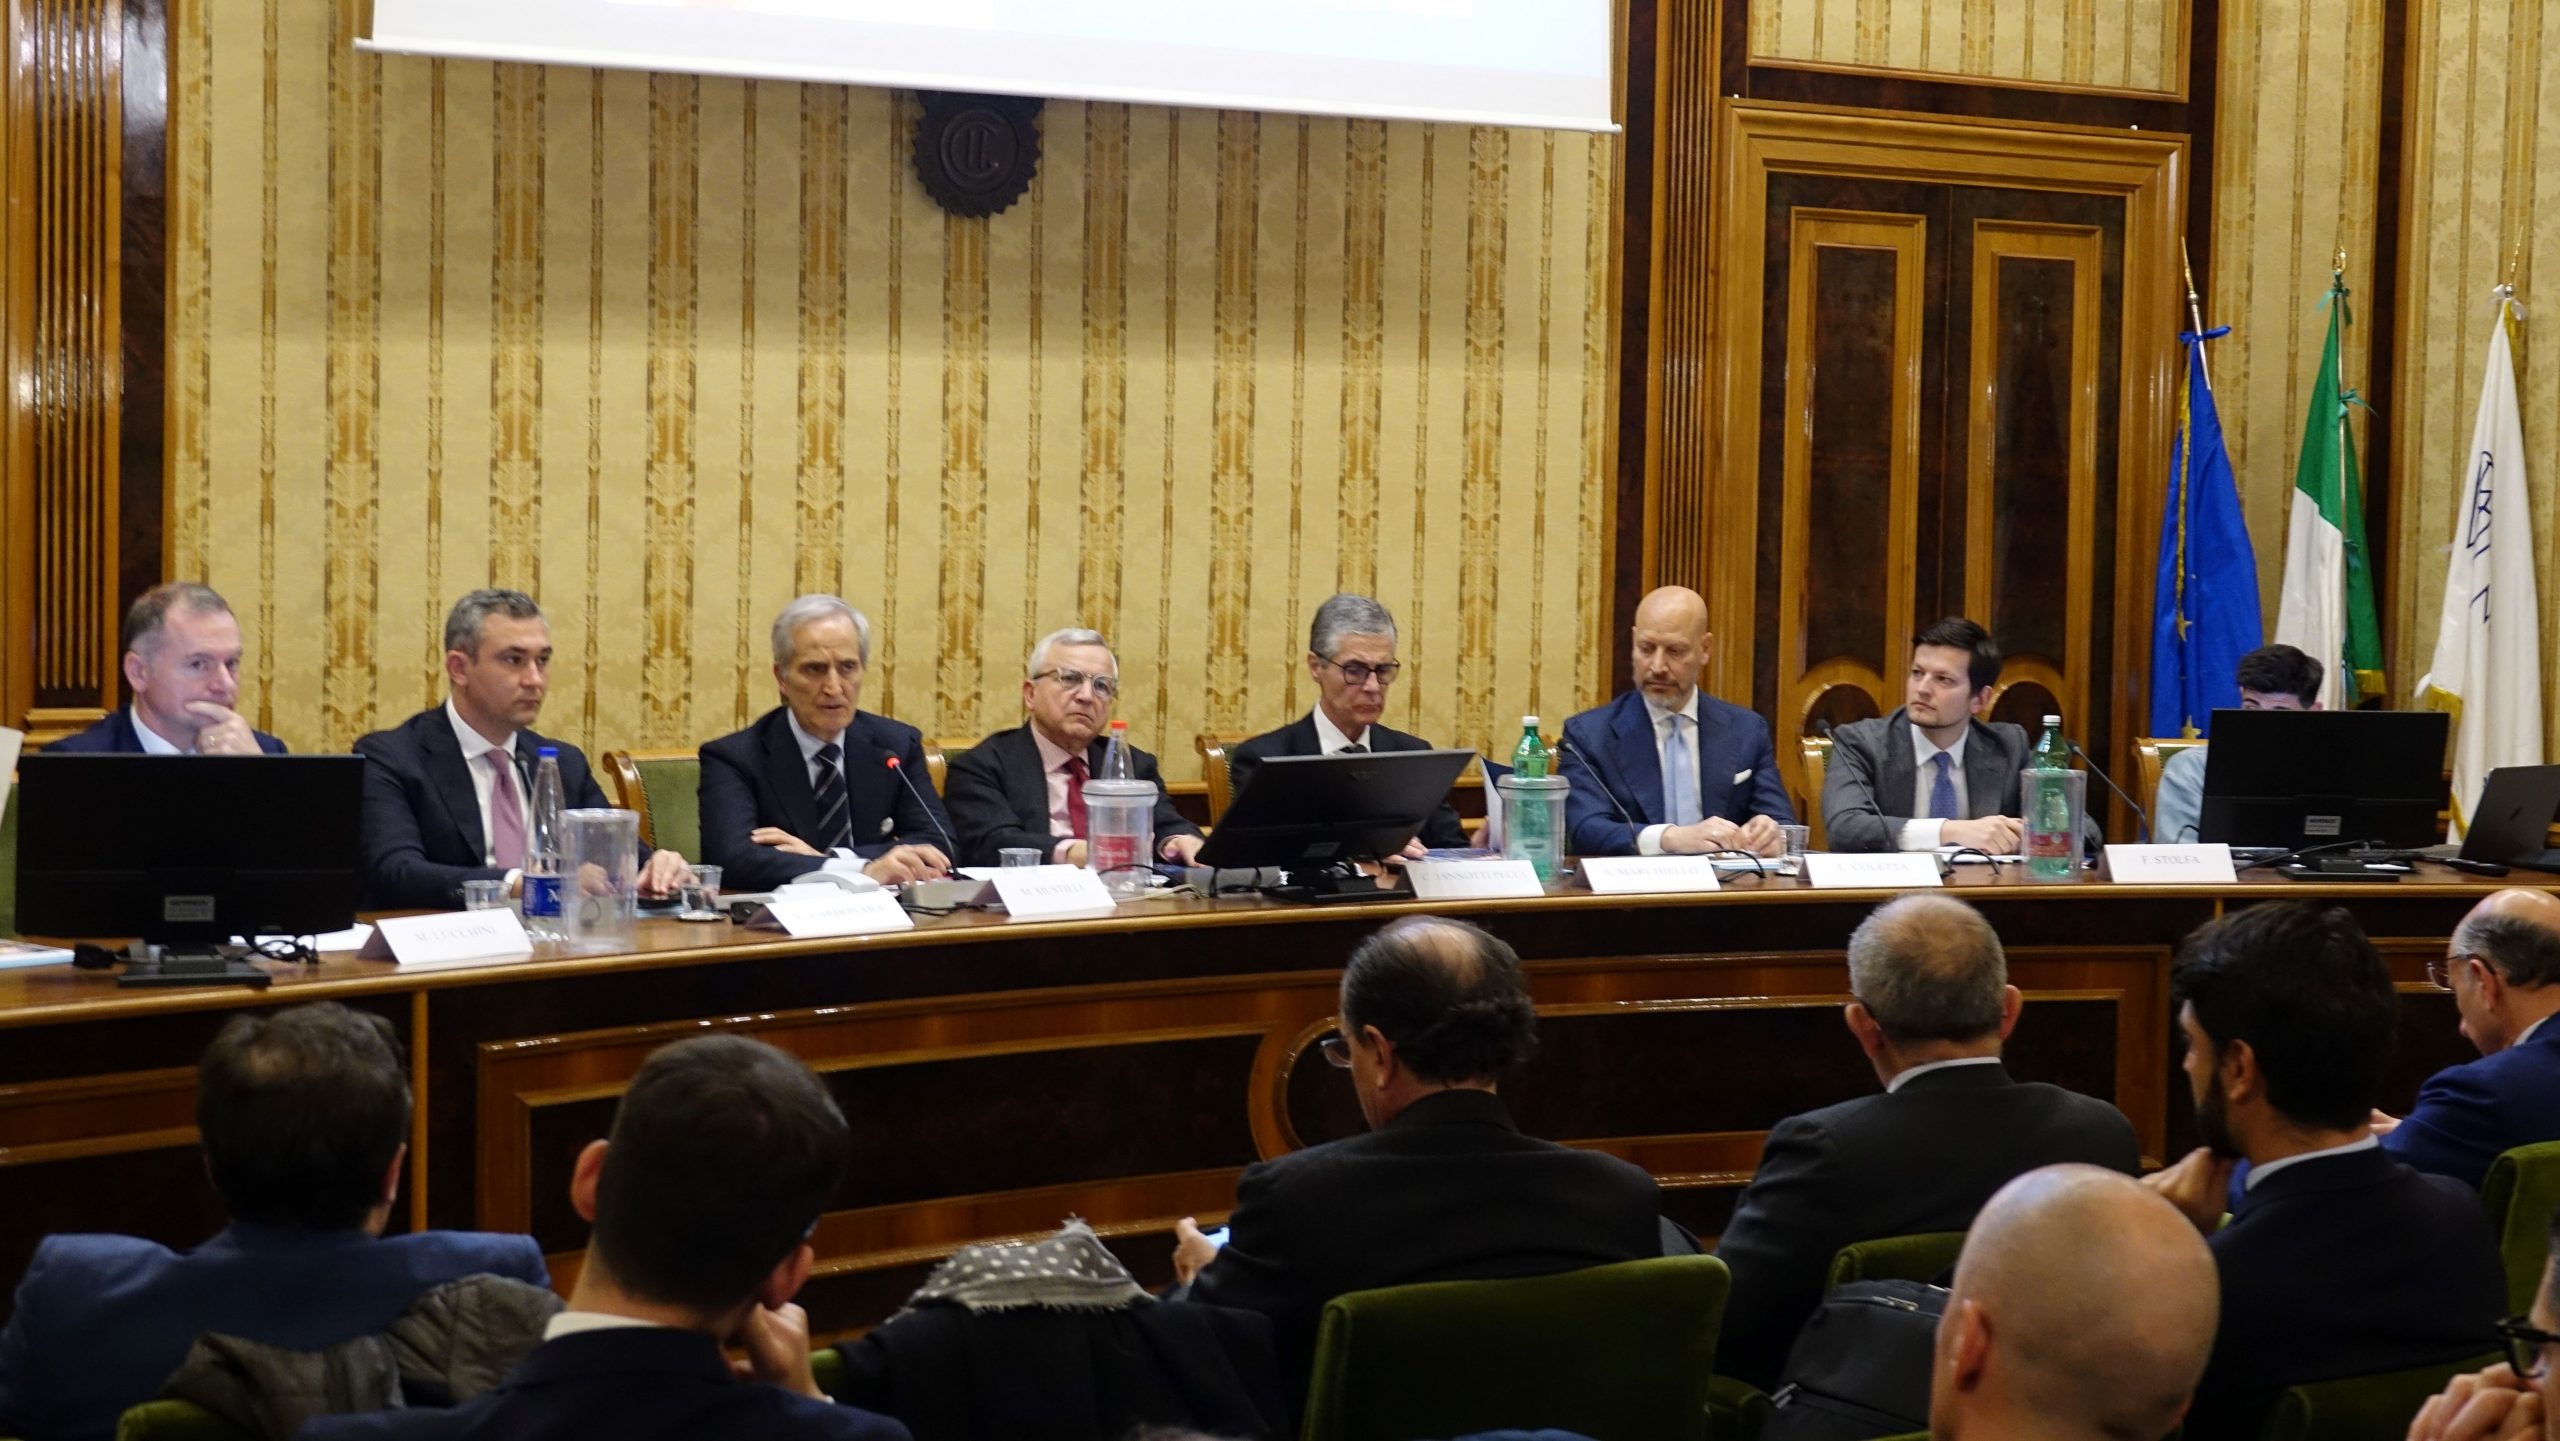 New opportunities and a hub for businesses in Campania